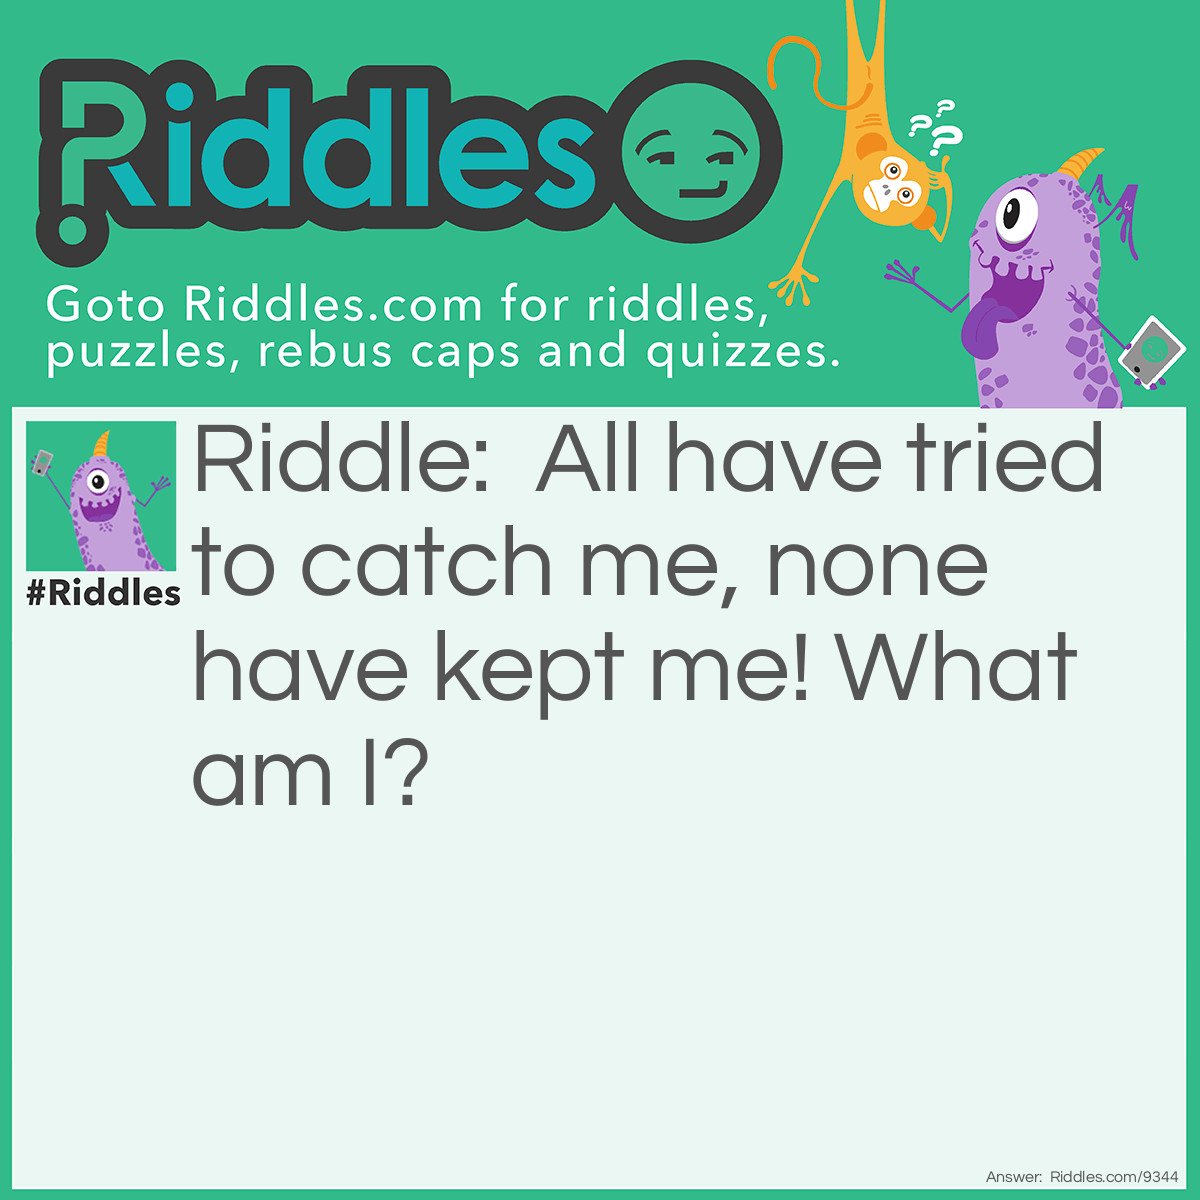 Riddle: All have tried to catch me, none have kept me! What am I? Answer: Satisfaction.